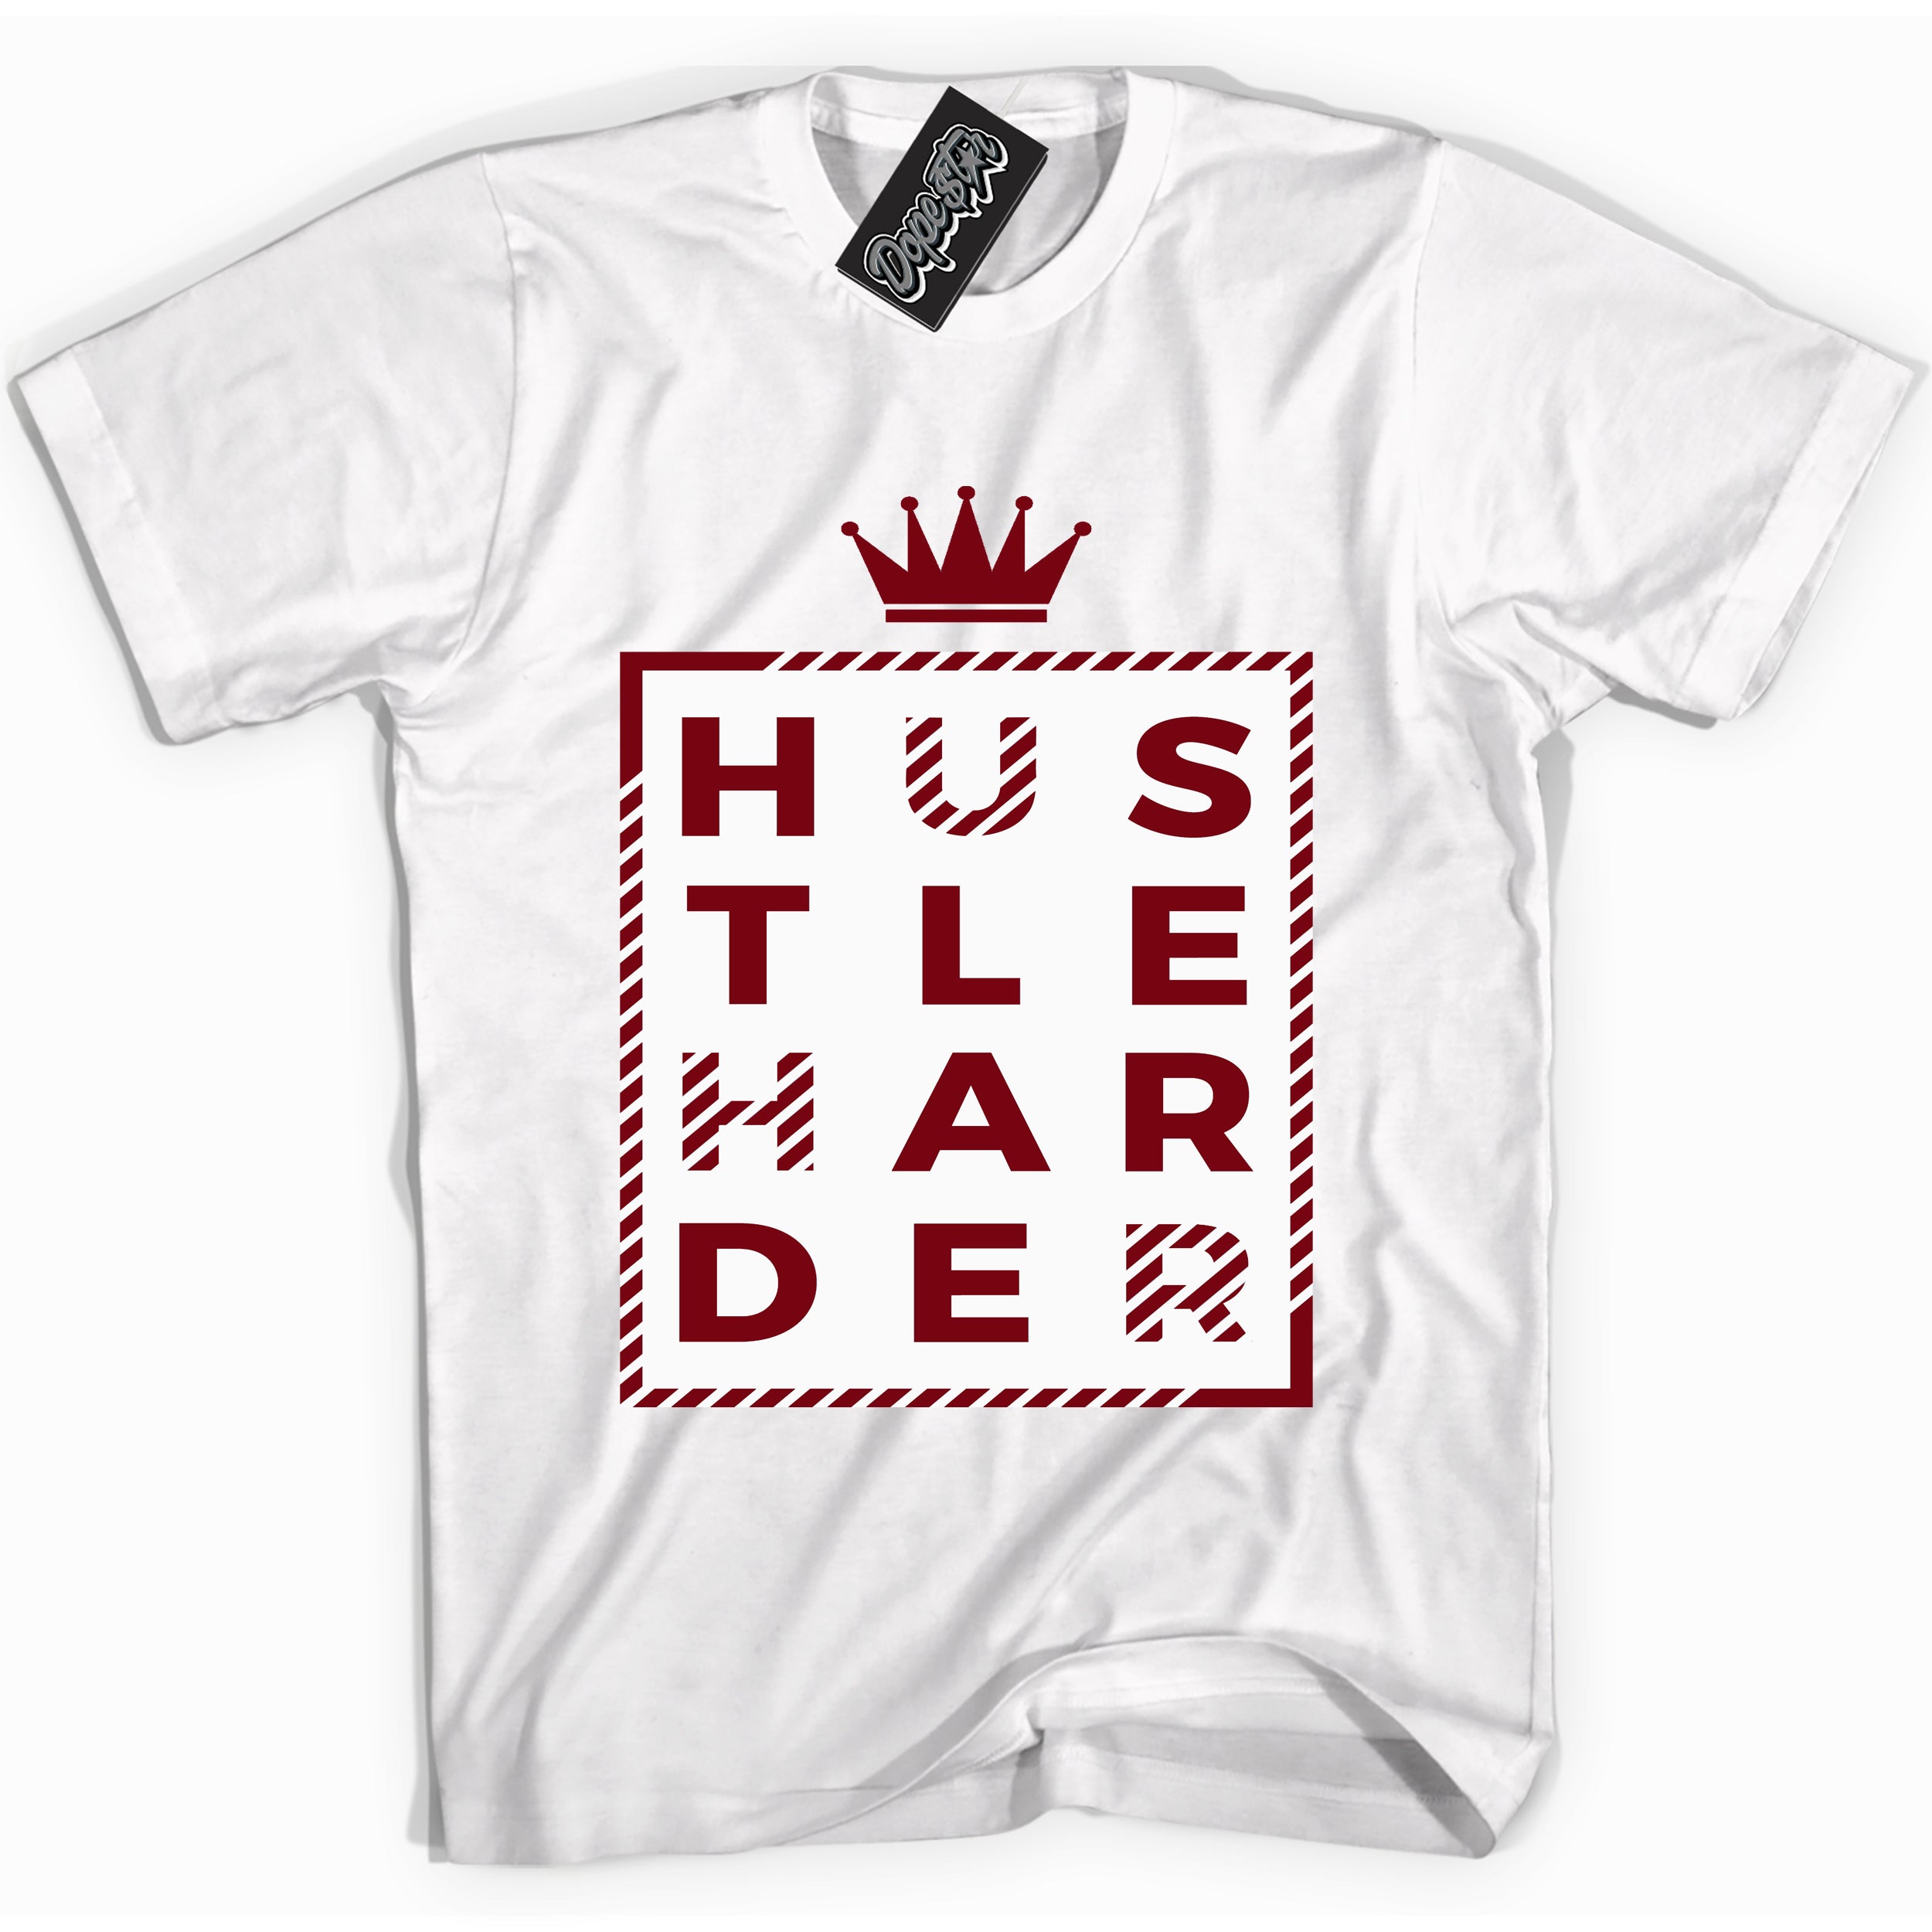 Cool White graphic tee with “ Hustle Harder ” print, that perfectly matches OG Metallic Burgundy 1s sneakers 